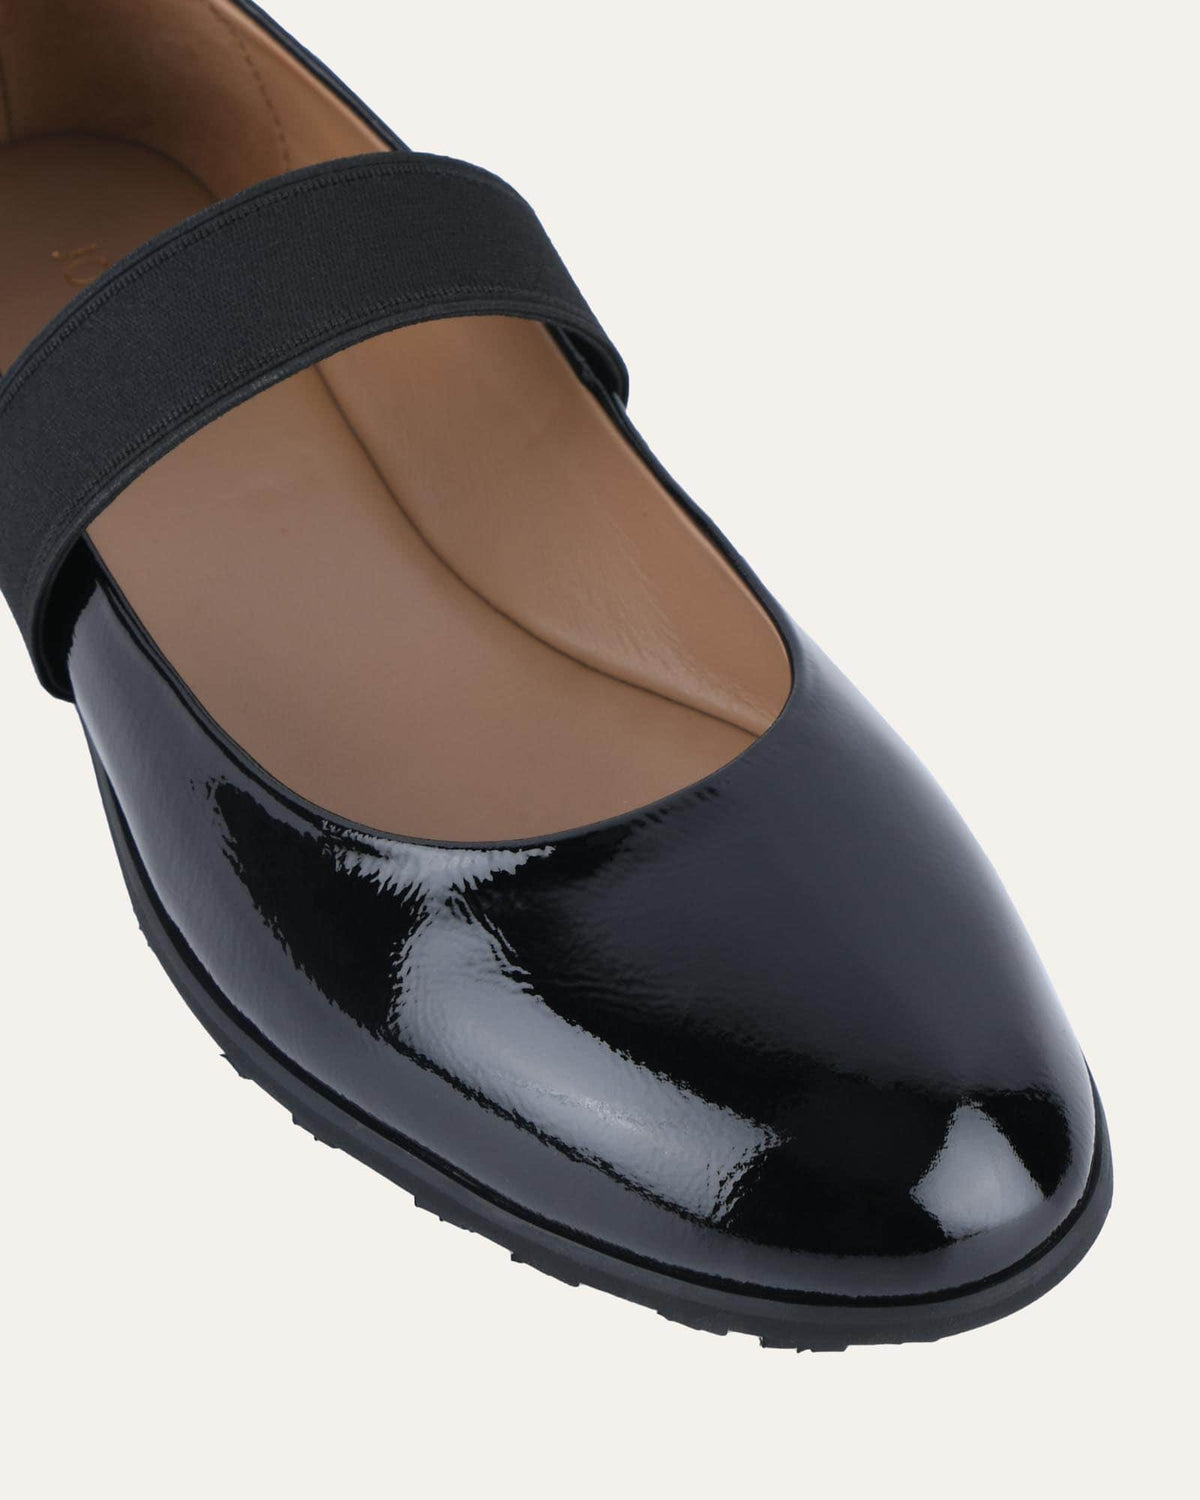 HOPE CASUAL FLATS BLACK CRINKLE PATENT